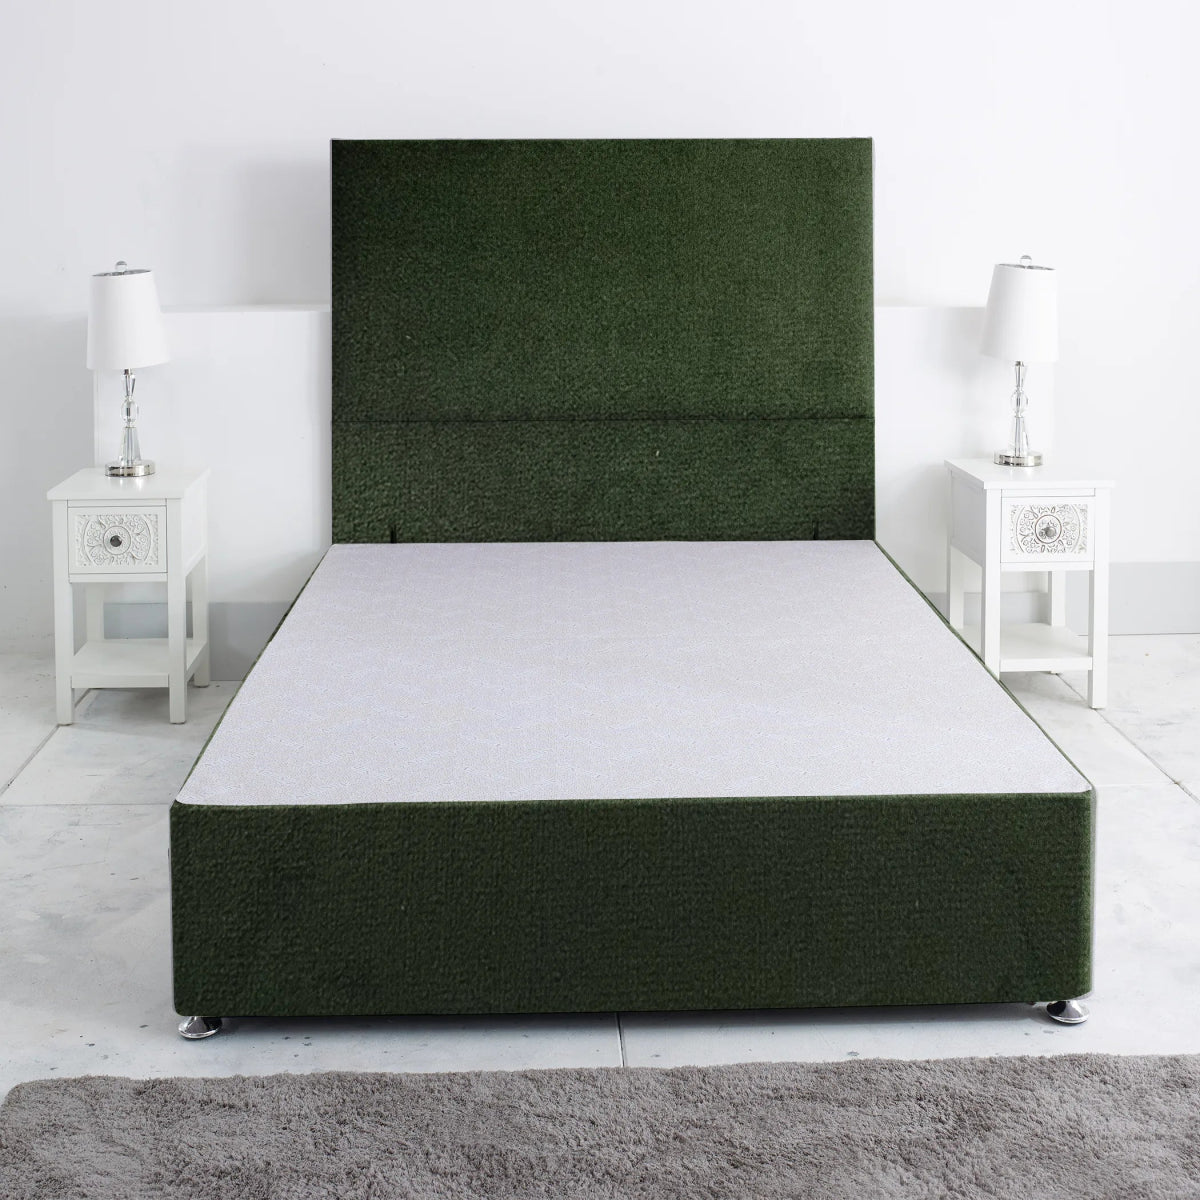 Princess Divan Base Only with Floor Standing 54 Inches Headboard - Divan Factory Outlet